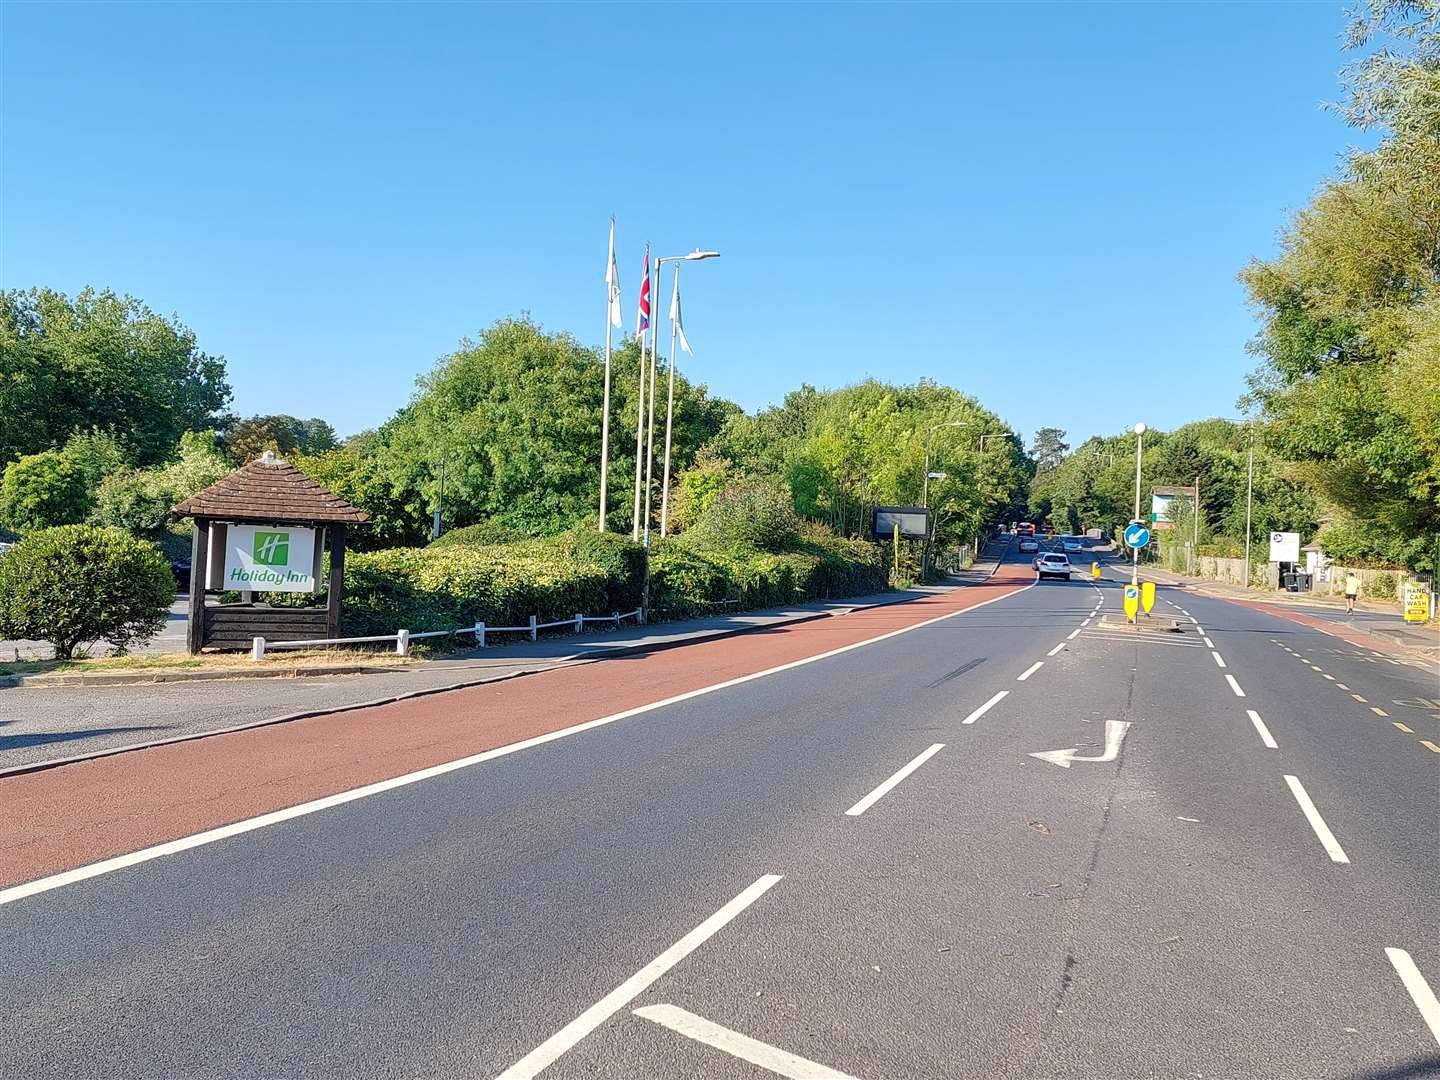 The land earmarked for an Aldi supermarket in Canterbury Road